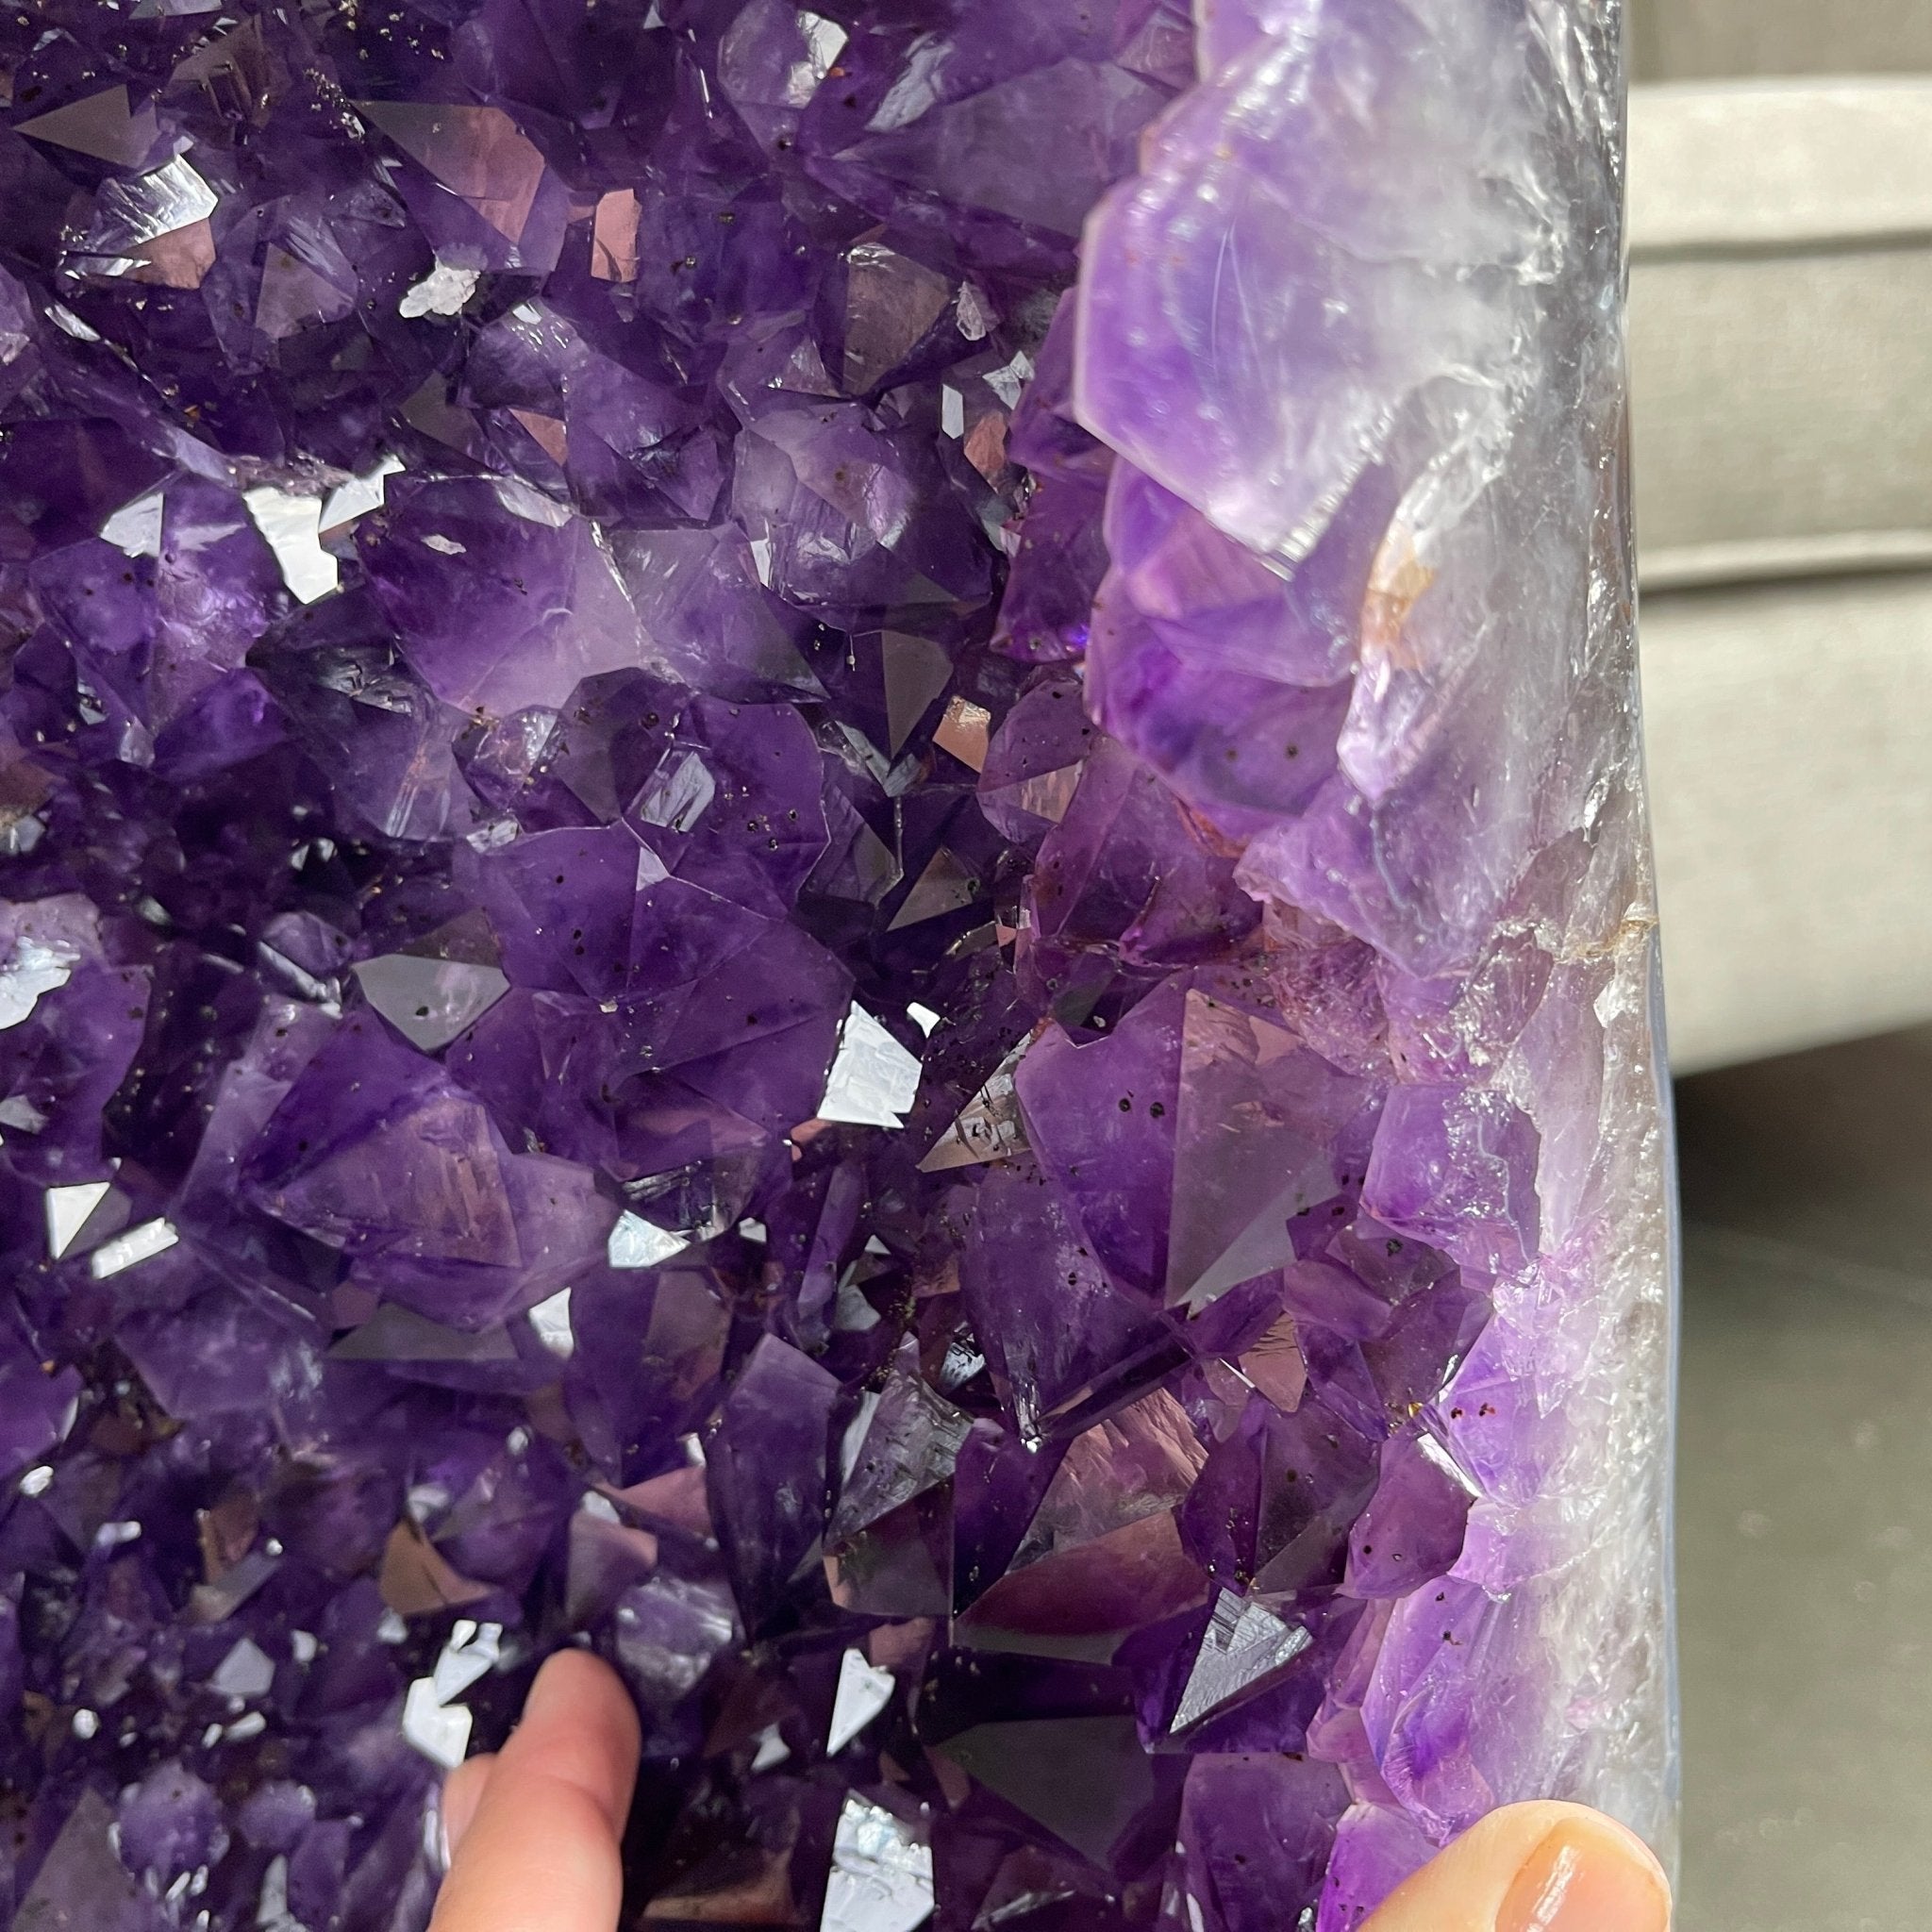 Super Quality Brazilian Amethyst Cathedral, 29” tall & 185.2 lbs #5601-0532 by Brazil Gems - Brazil GemsBrazil GemsSuper Quality Brazilian Amethyst Cathedral, 29” tall & 185.2 lbs #5601-0532 by Brazil GemsCathedrals5601-0532